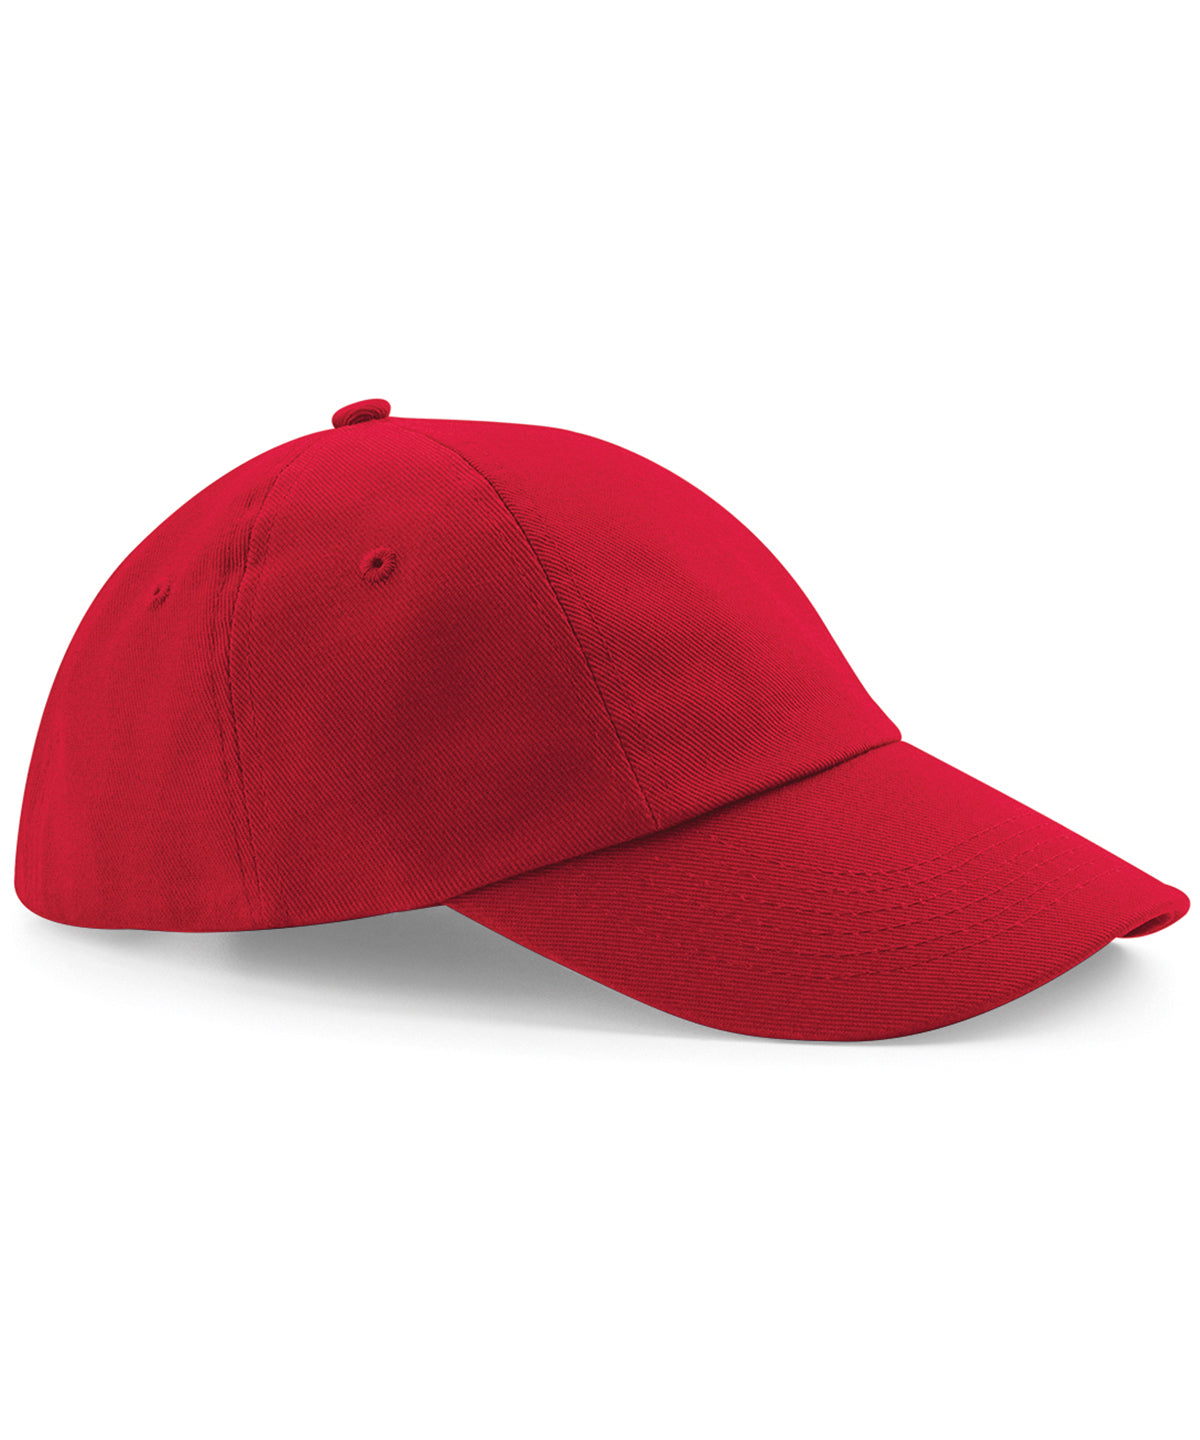 Personalised Caps - Mid Red Beechfield Low-profile heavy cotton drill cap